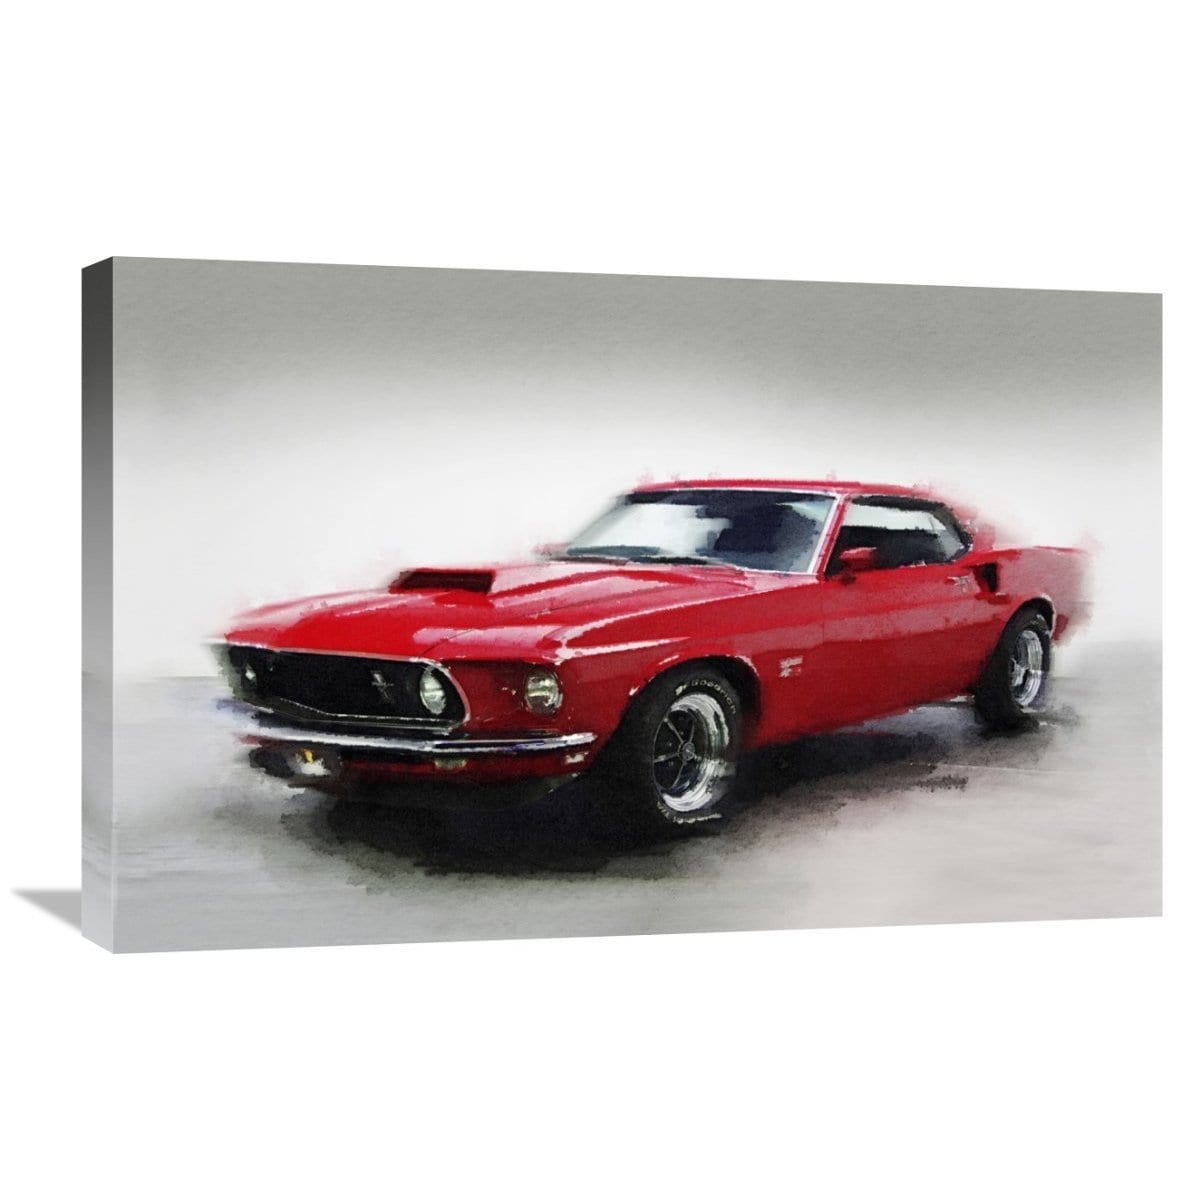 Shop Naxart Studio 1969 Ford Mustang Watercolor Stretched Canvas Wall Art Overstock 13951816